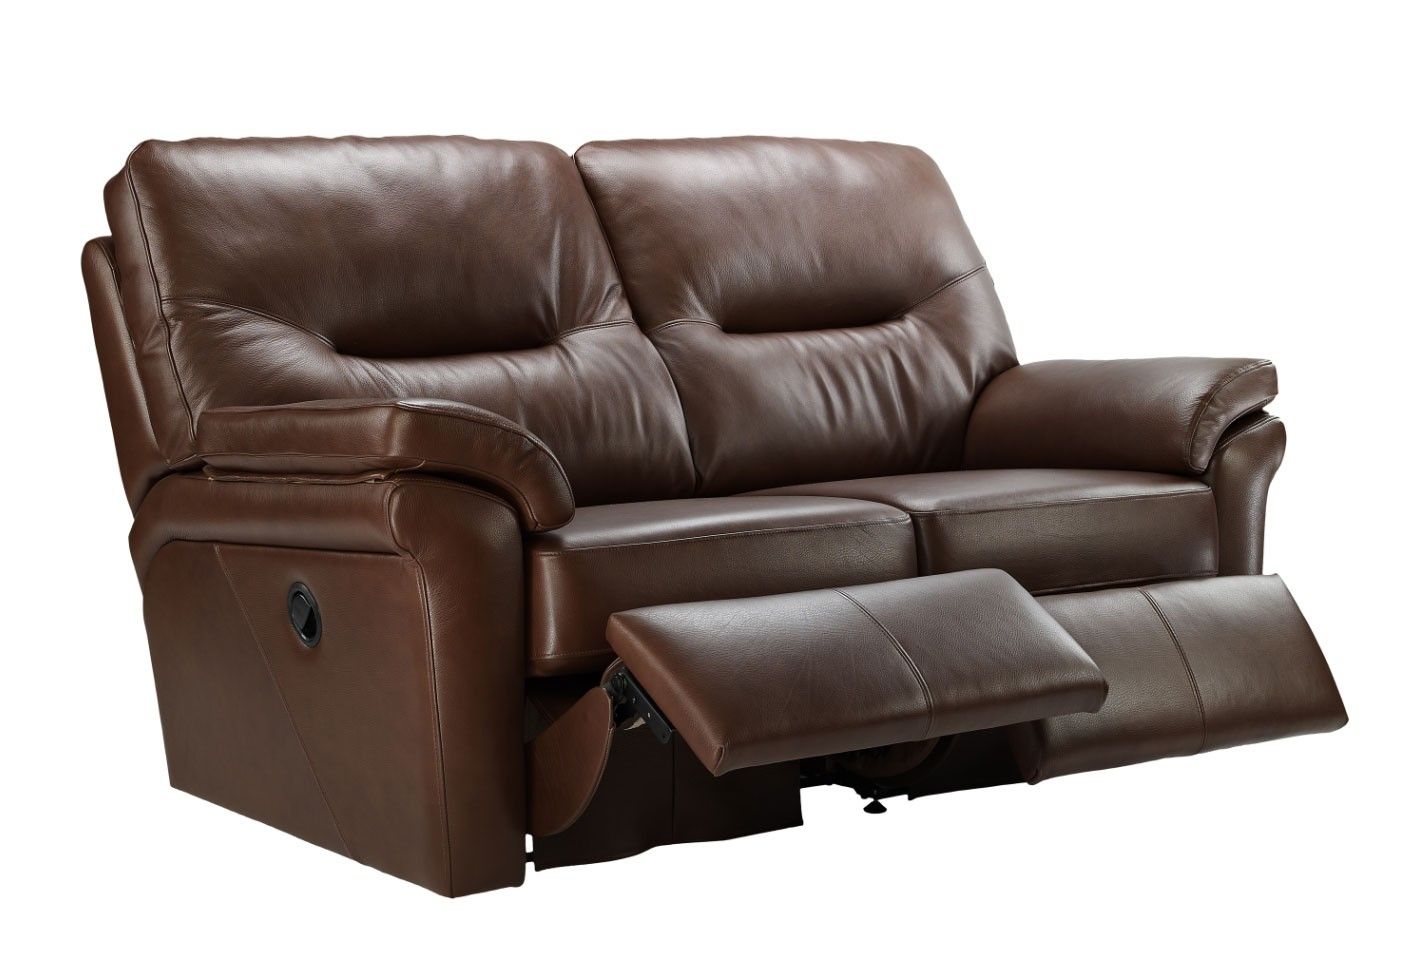 G Plan Washington Leather 2 Seater Double Recliner Sofa | Tr Hayes Intended For Recliner Sofas (Photo 2 of 10)